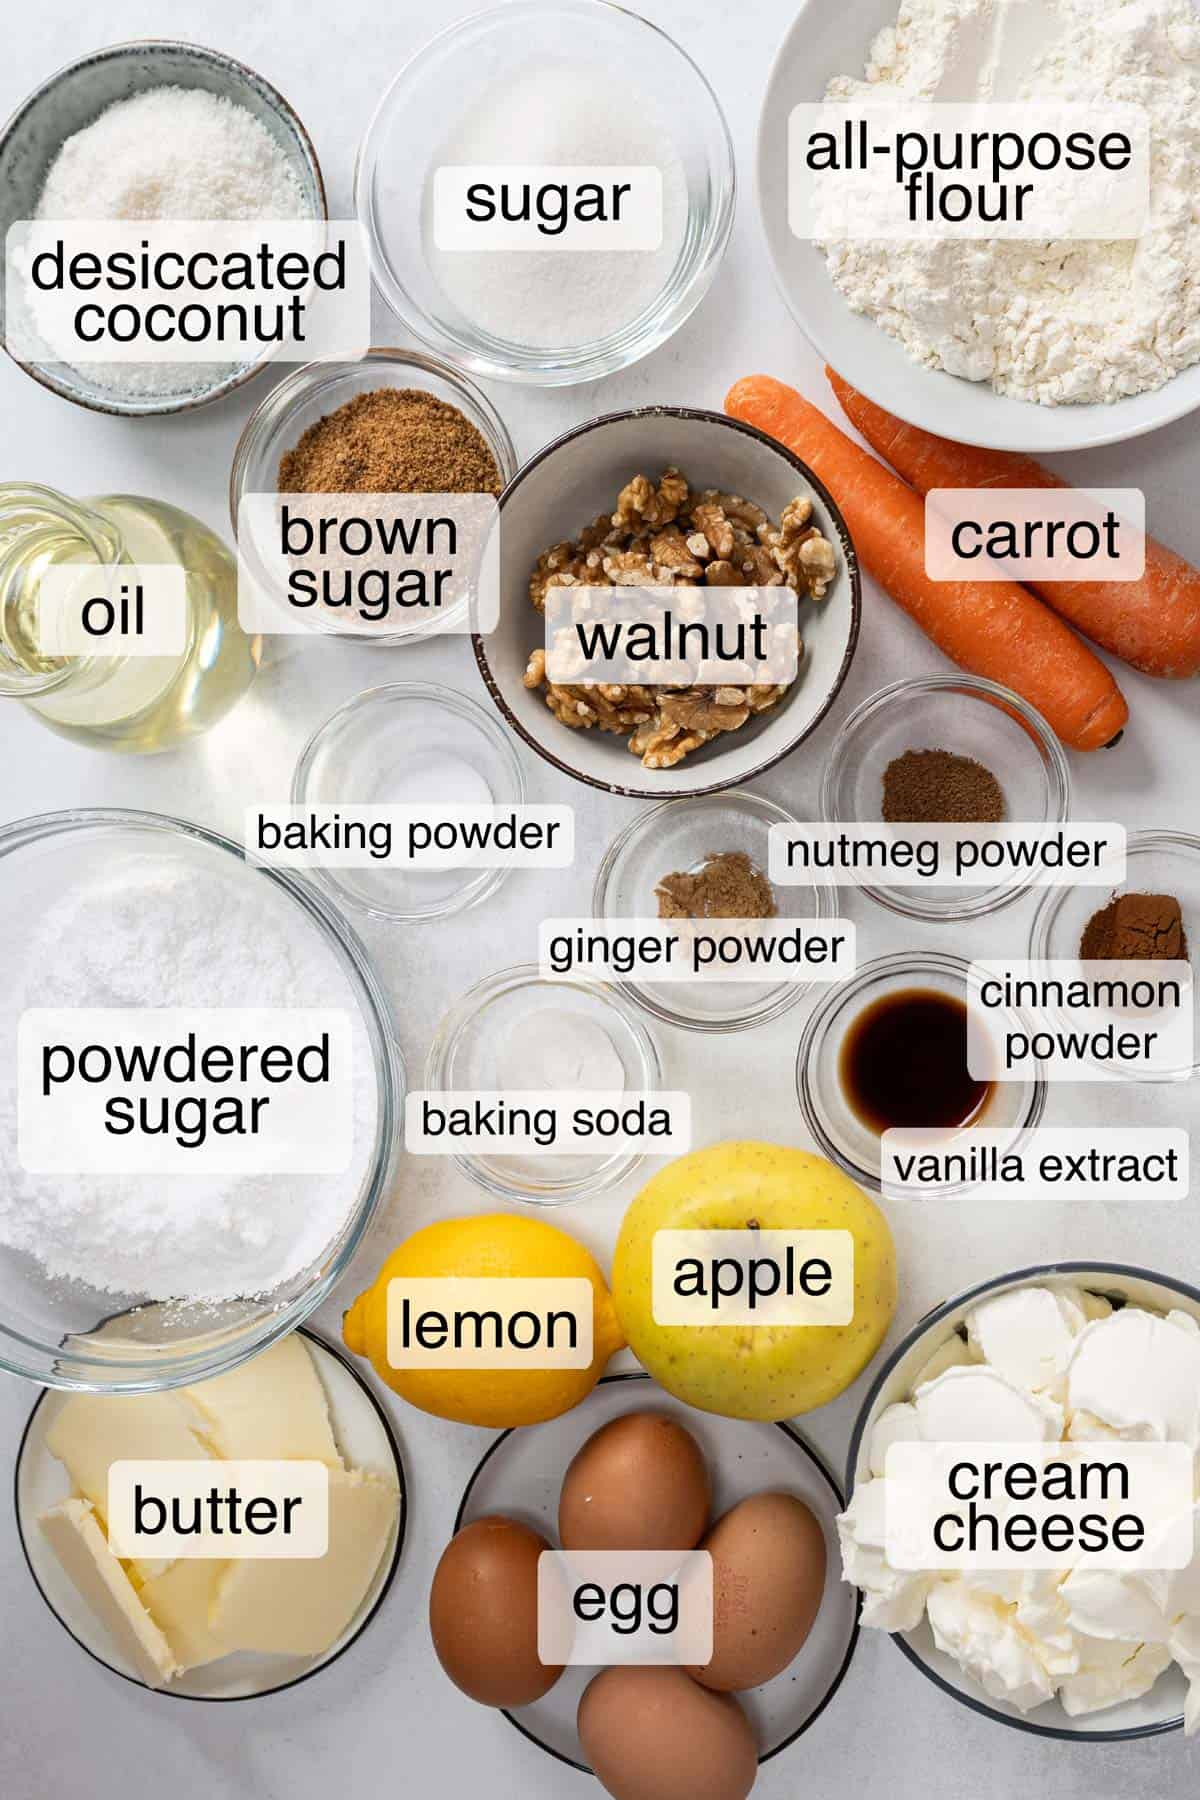 Ingredients to make the best carrot cake.